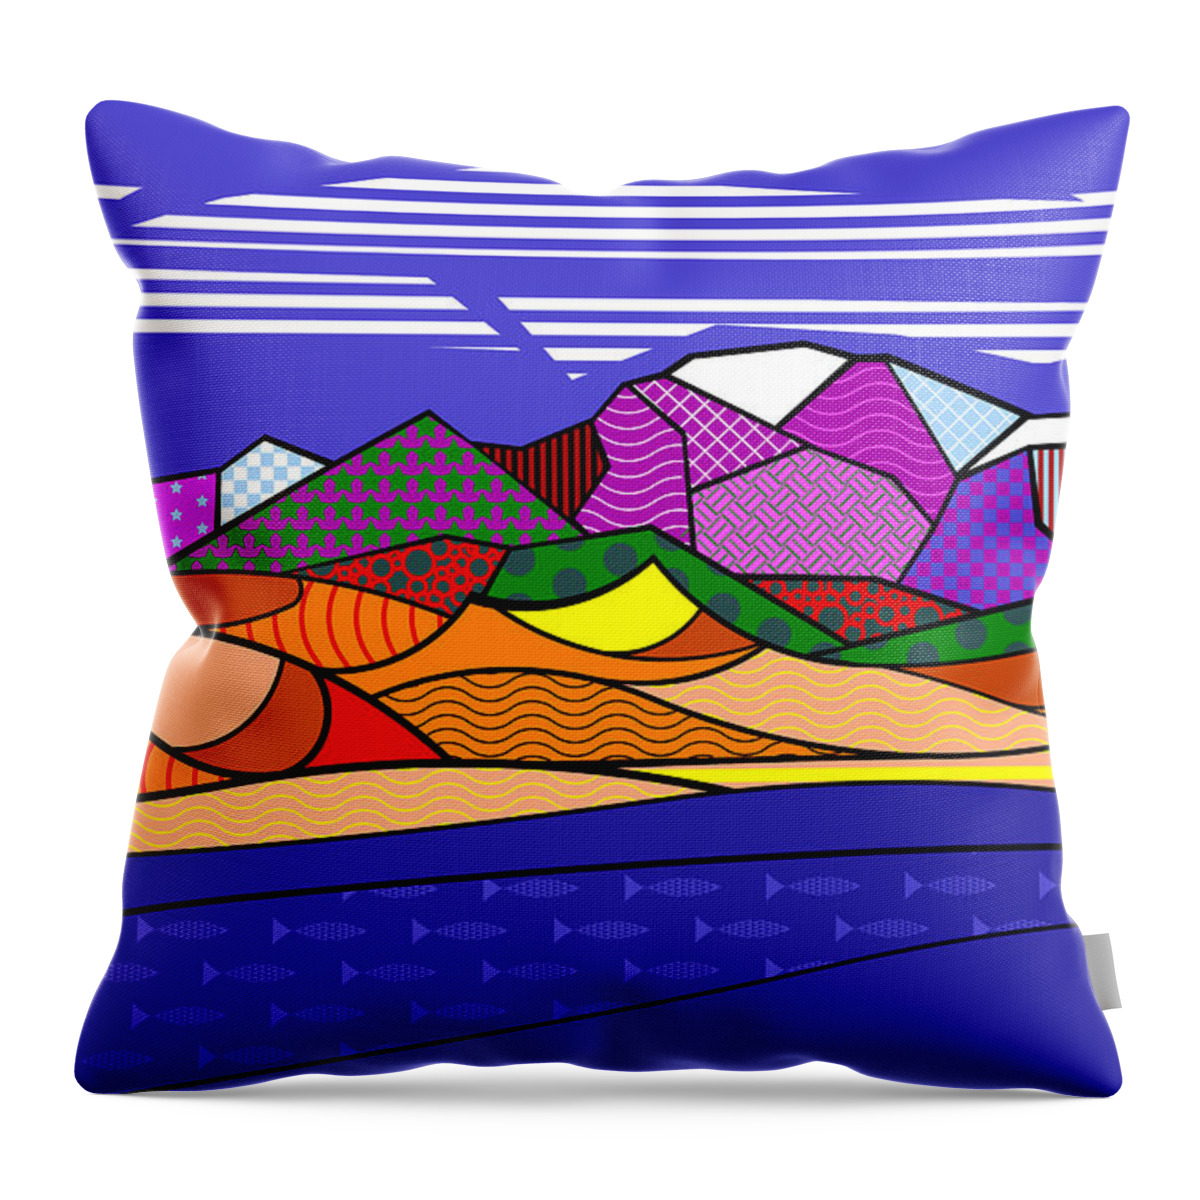 Colorado Throw Pillow featuring the digital art Great Sand Dunes by Randall J Henrie